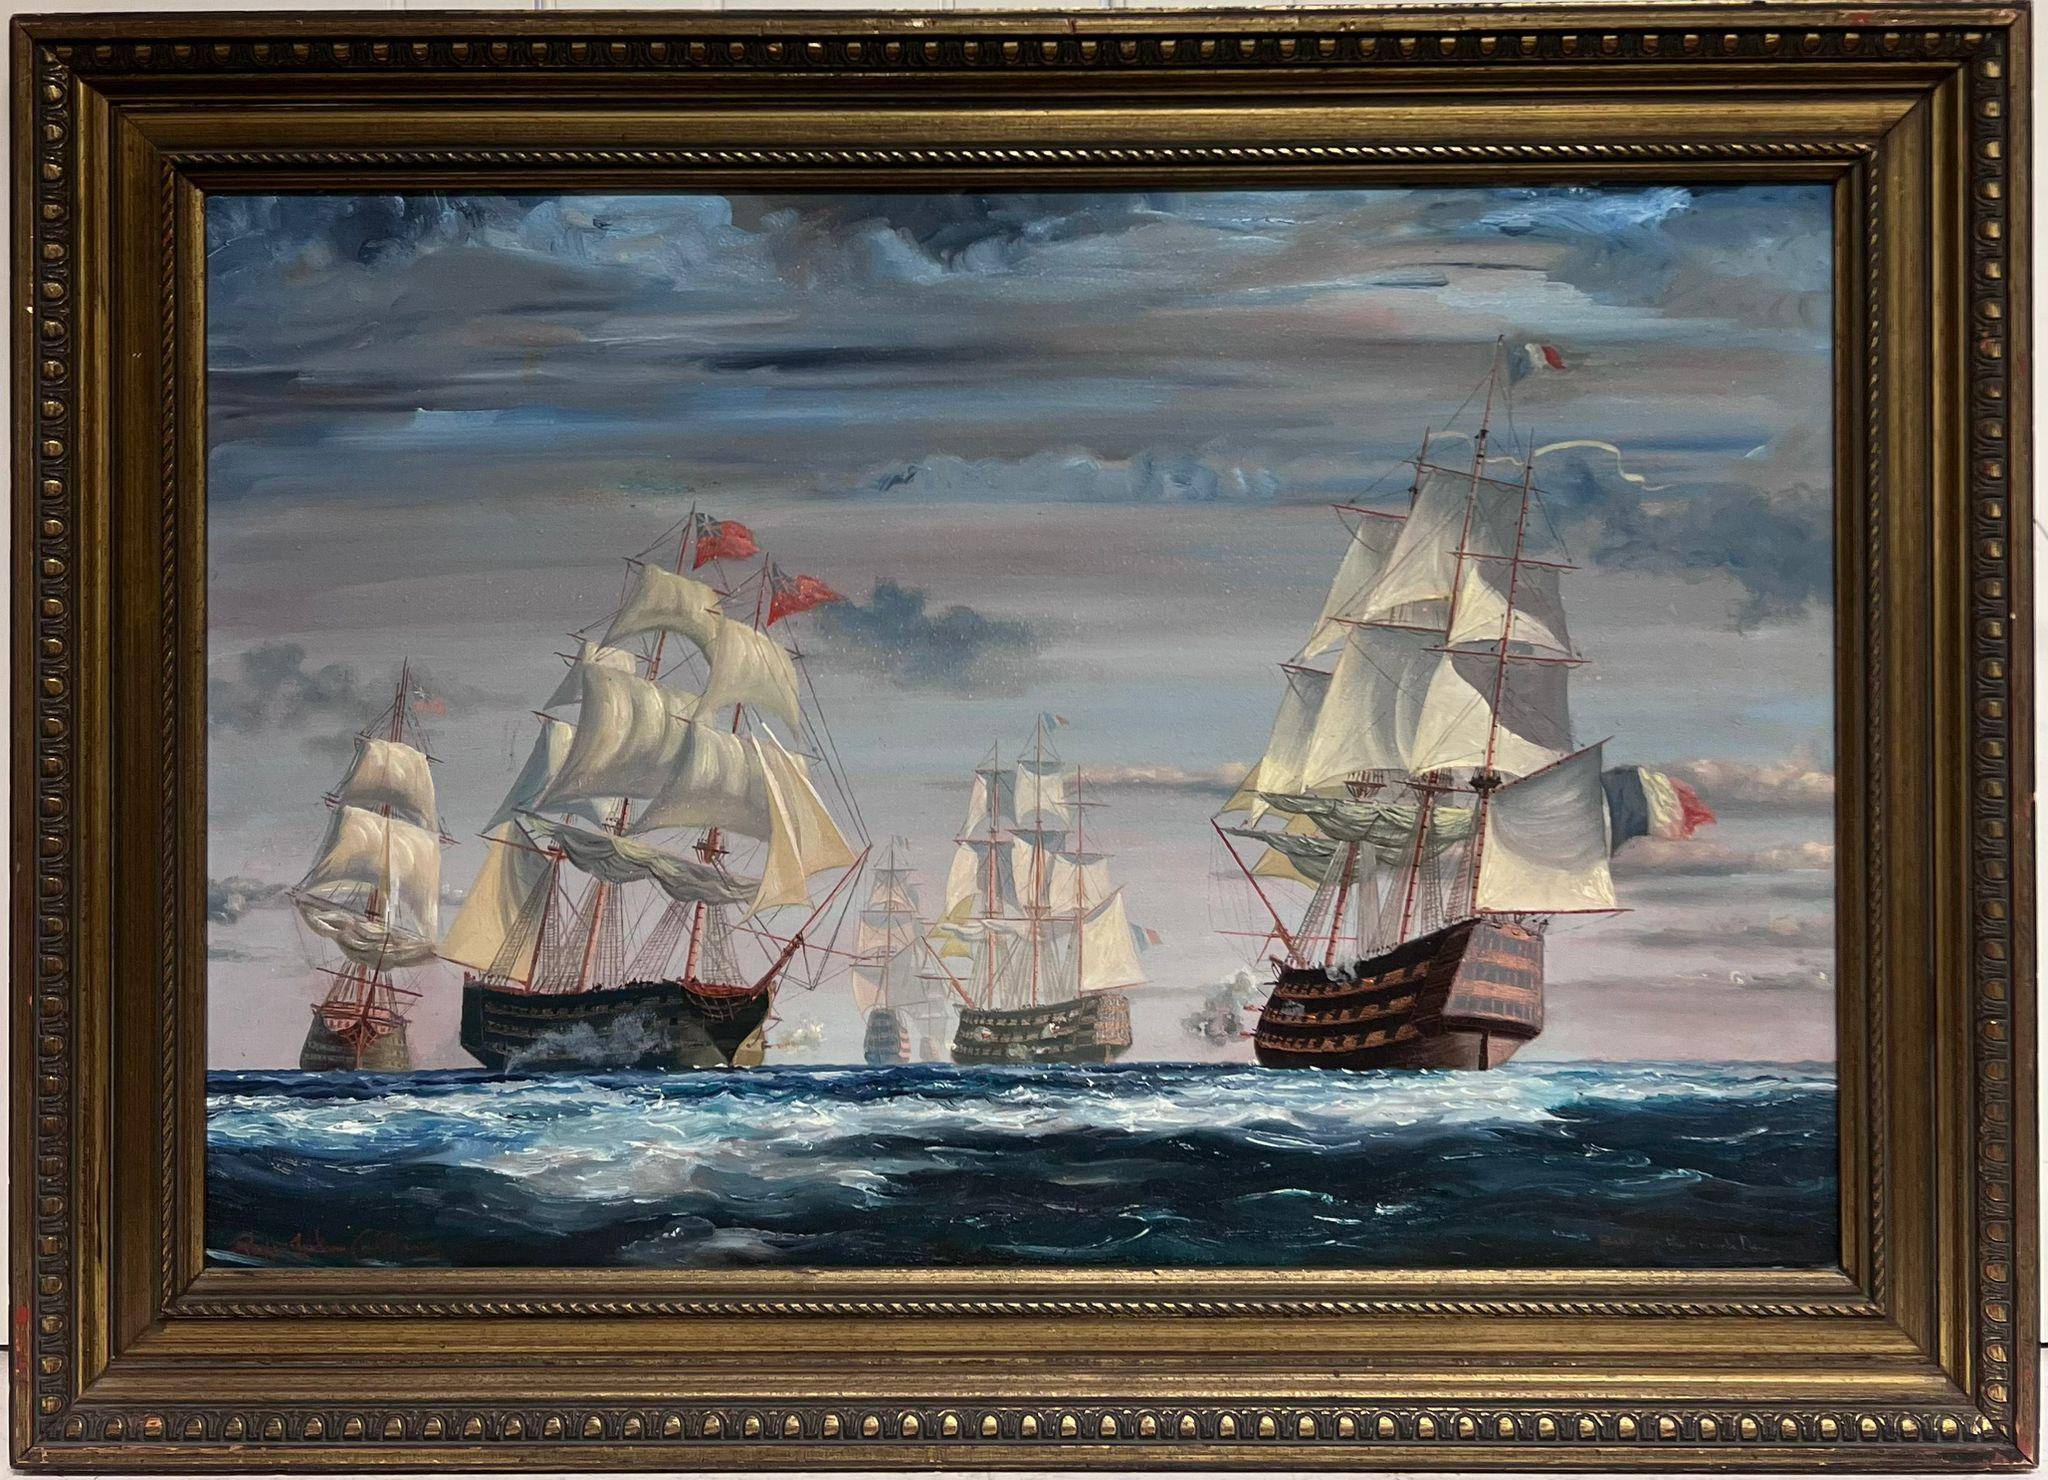 Roger John Collins Landscape Painting - Large British Maritime Naval Battle Engagement at Sea 18th Century Classic Ships